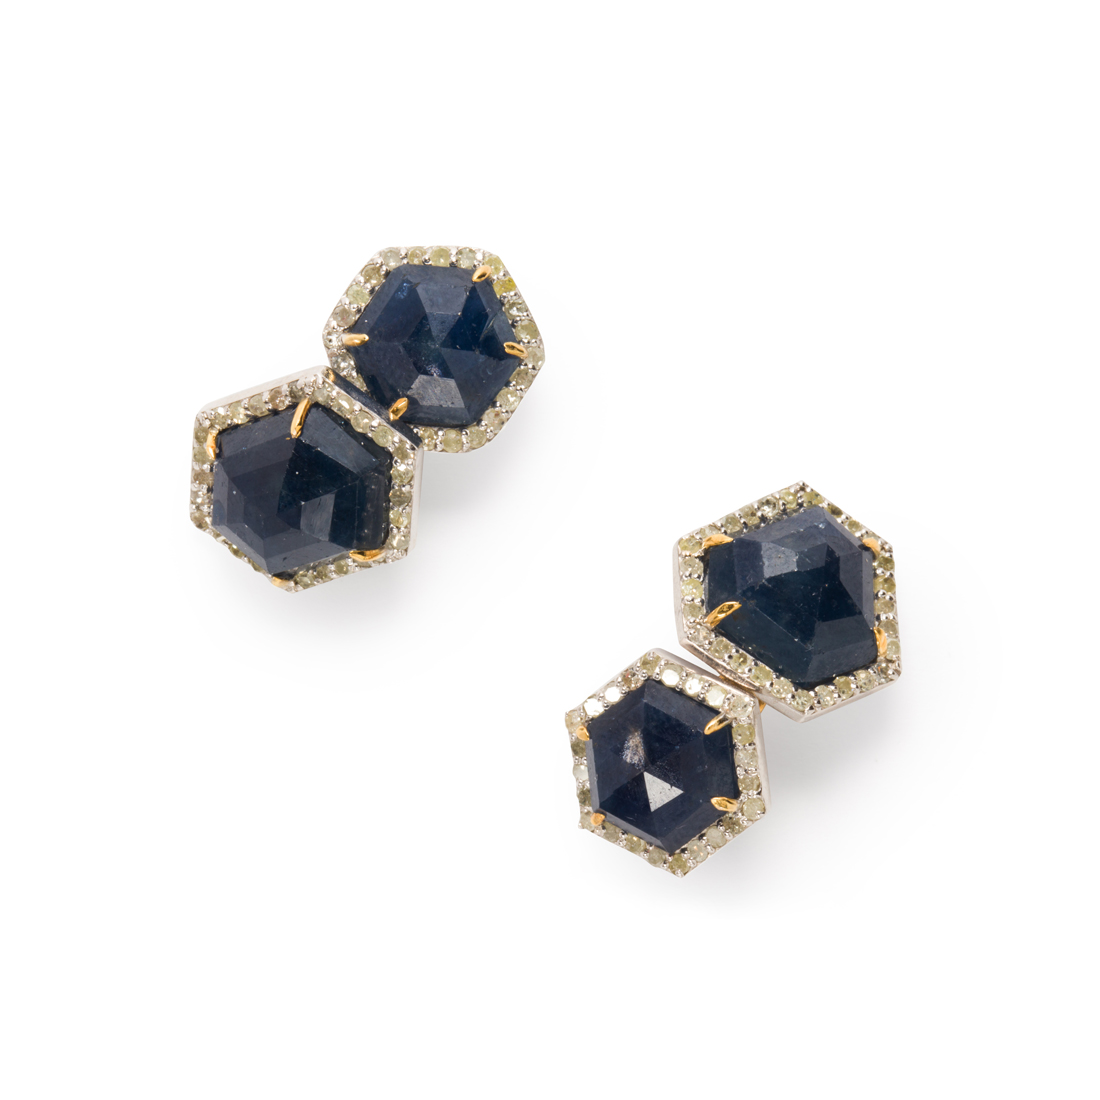 A PAIR OF SAPPHIRE AND DIAMOND 3a1f7b